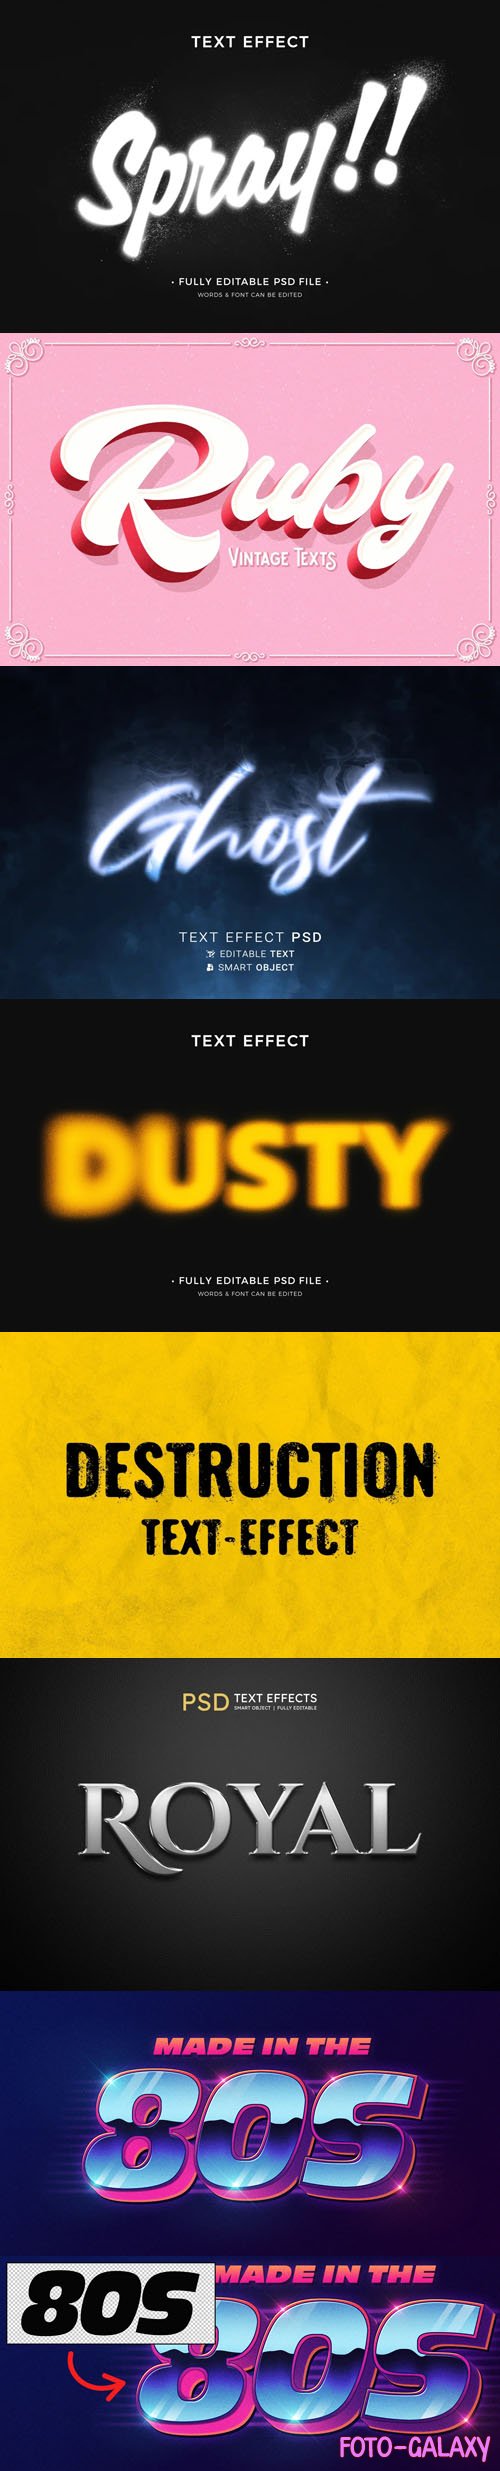 Best New Awesome Text Effects for Photoshop